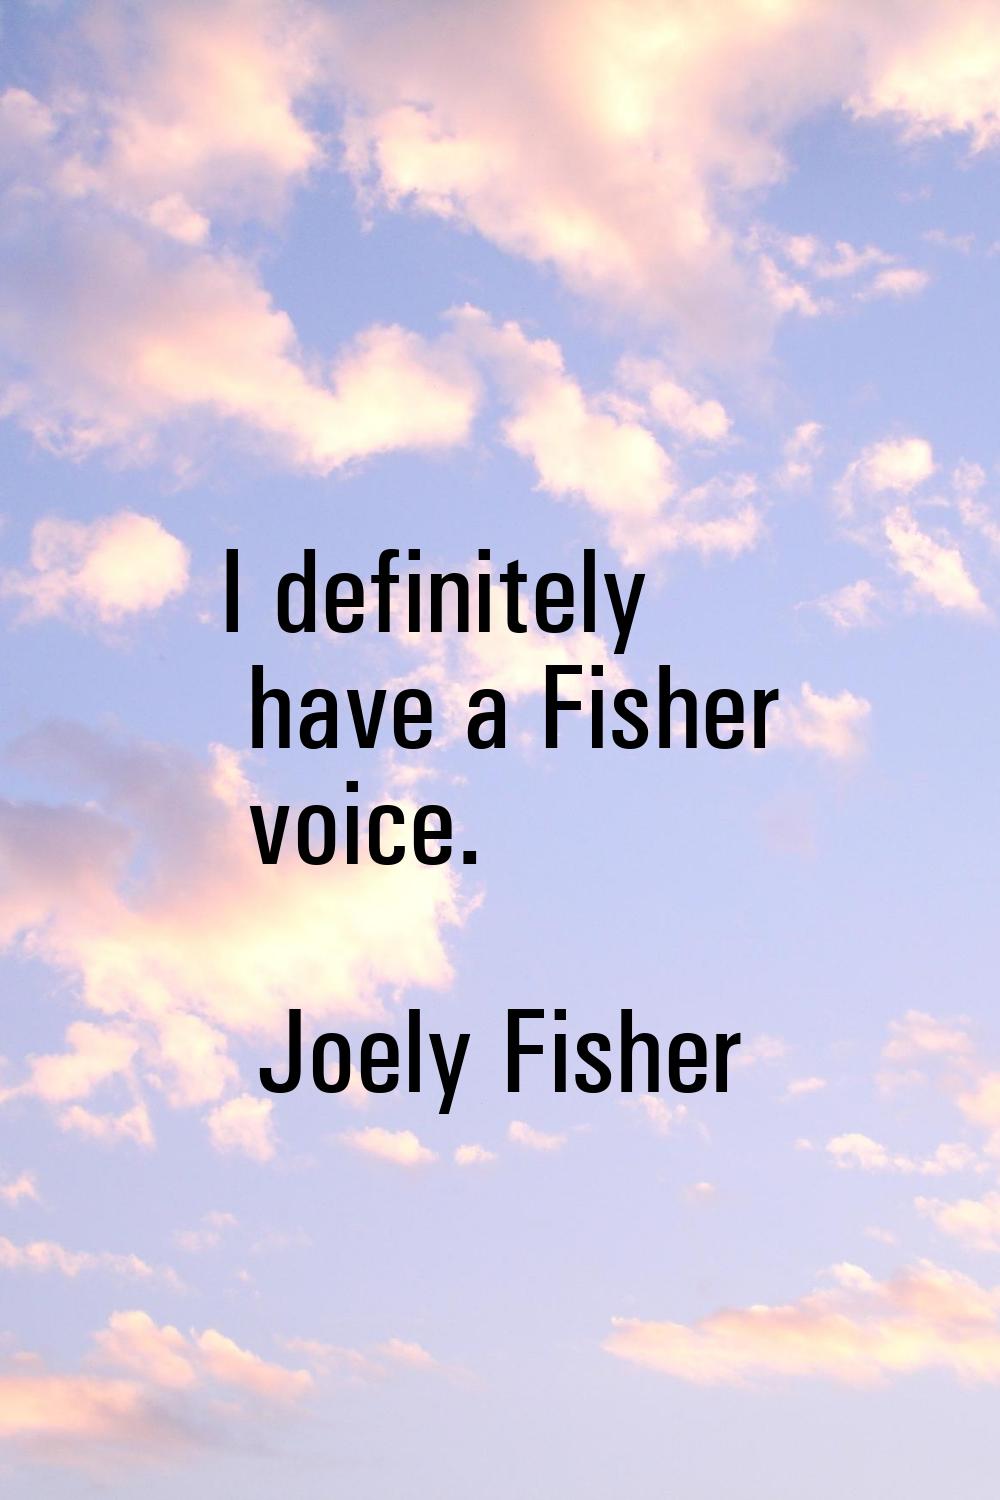 I definitely have a Fisher voice.